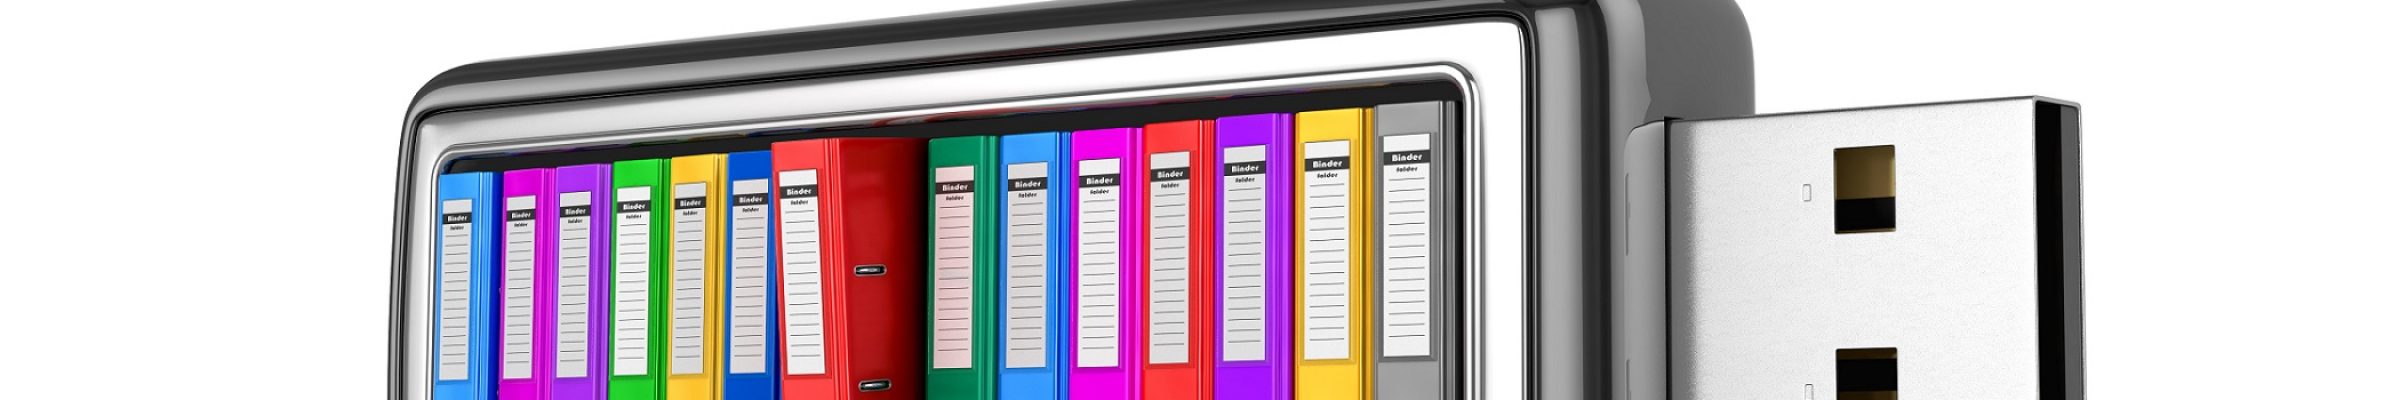 Multicolored office folder with documents inside a USB drive on a white background. 3D illustration.